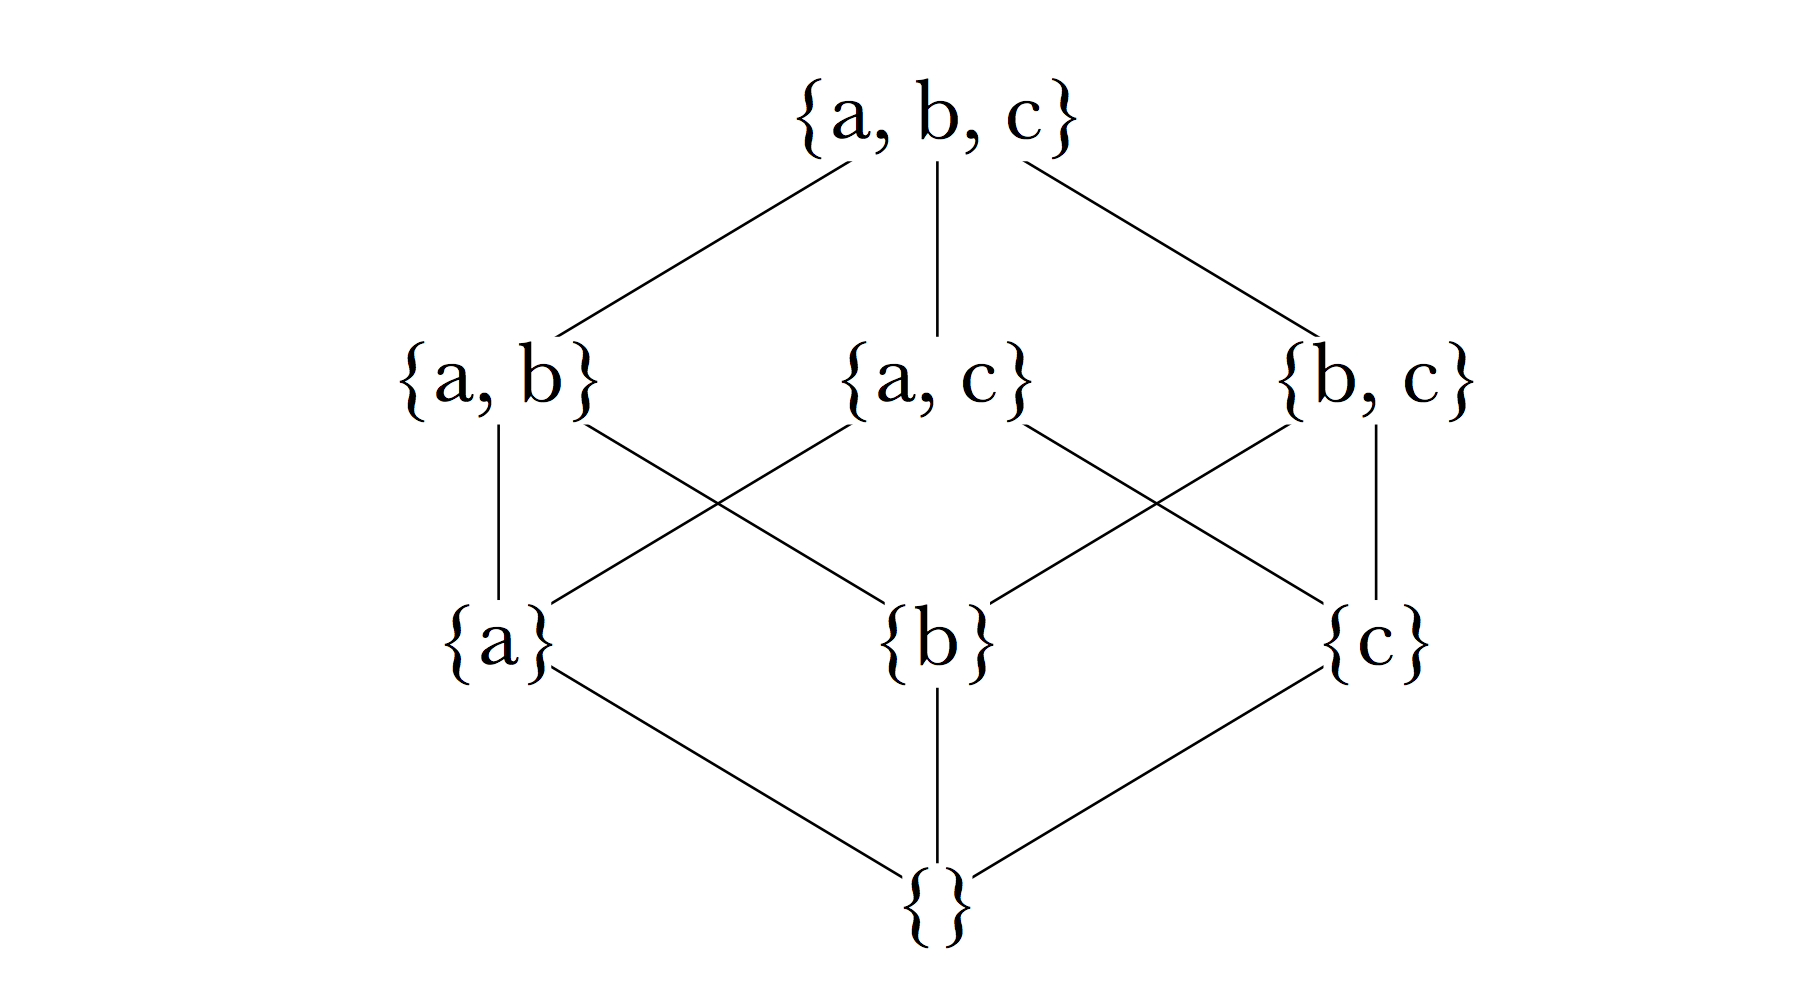 A diagram of a lattice showing interconnections between multiple nodes.